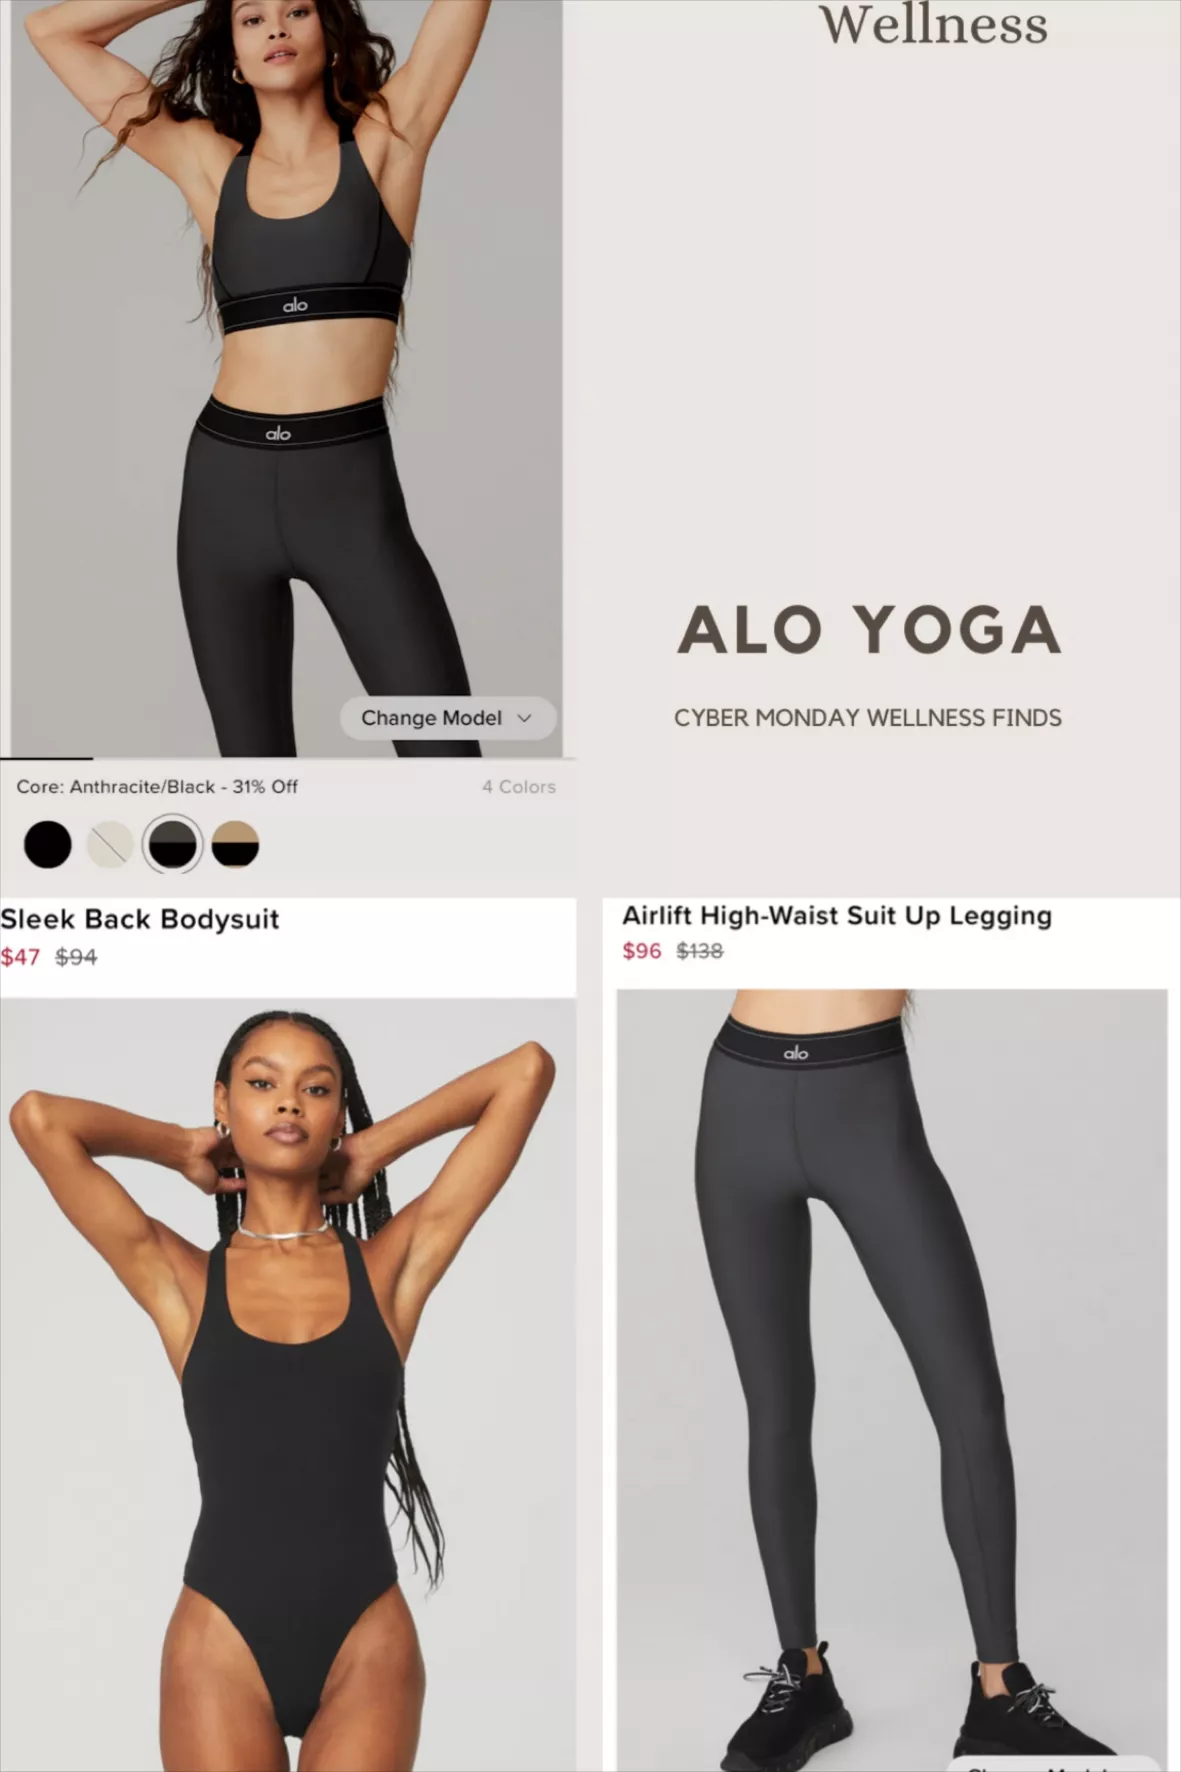 alo】Airlift High-Waist Suit Up Legging